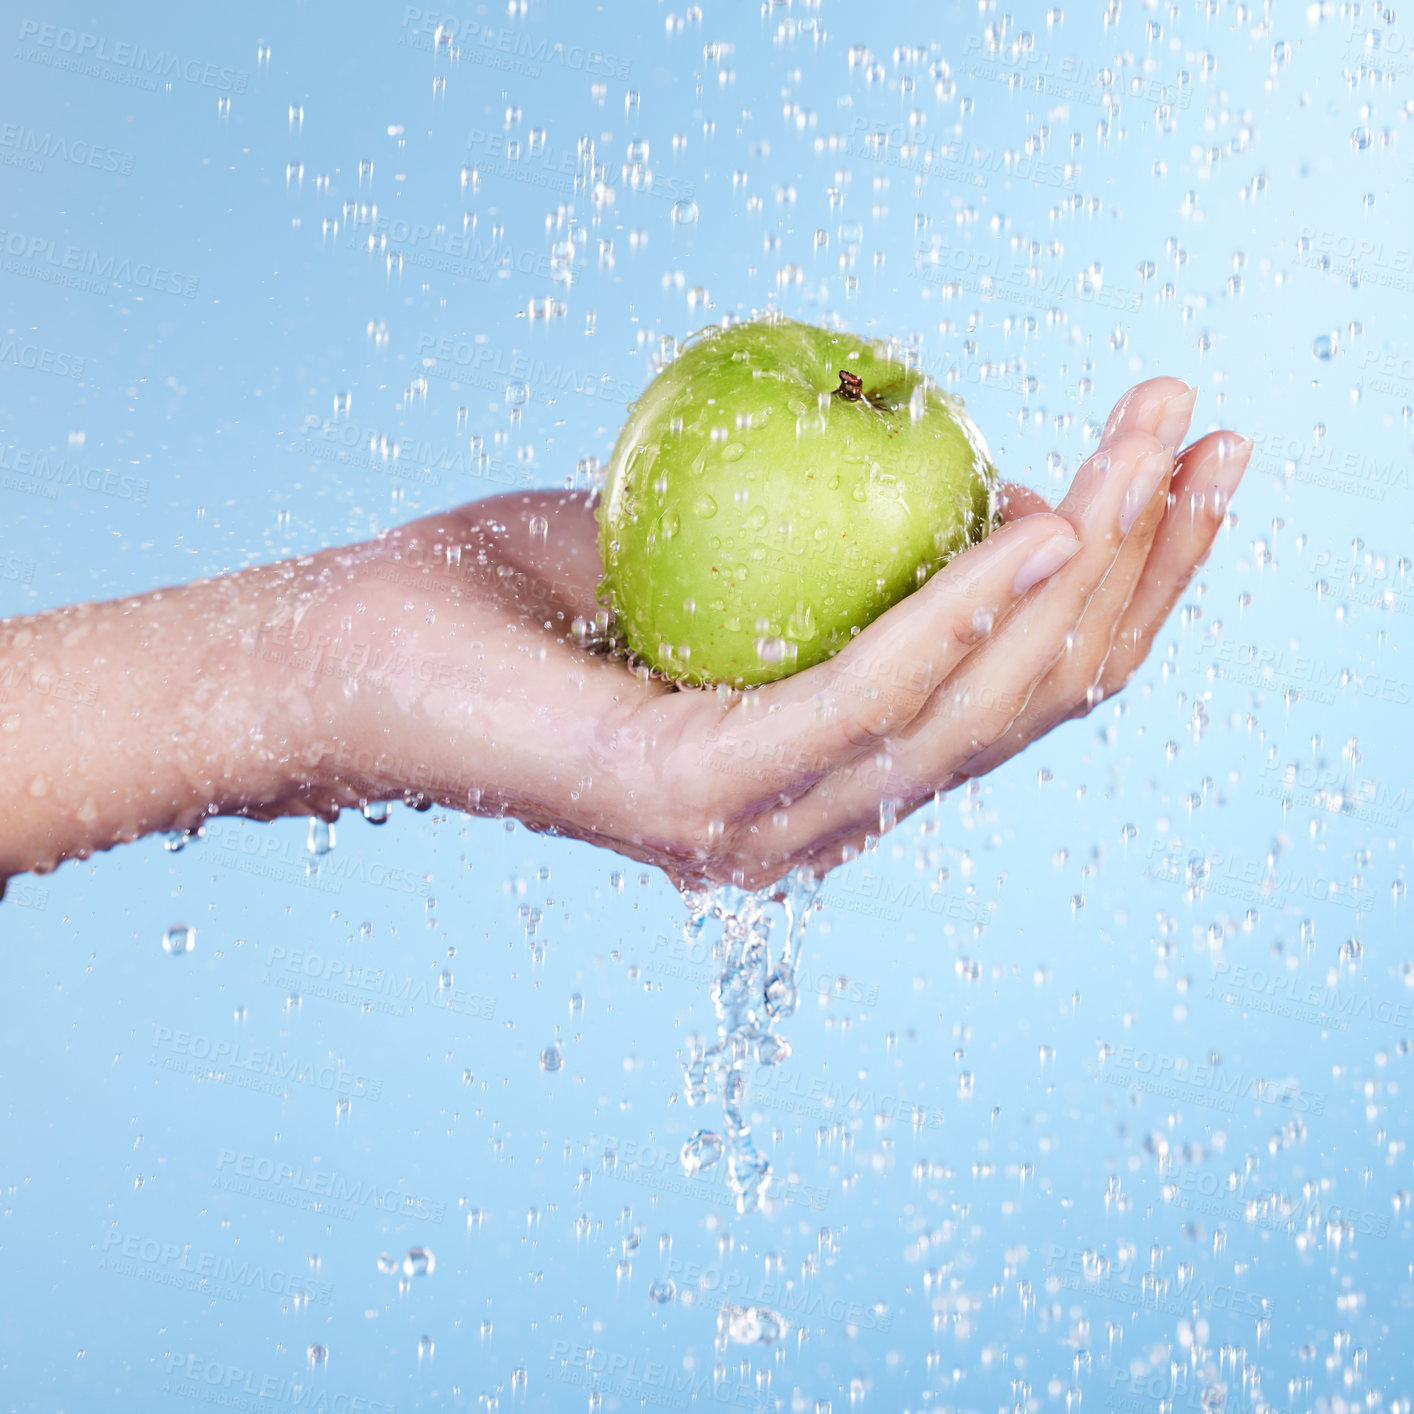 Buy stock photo Studio shot of an unrecognisable woman holding a green apple under running water against a blue background